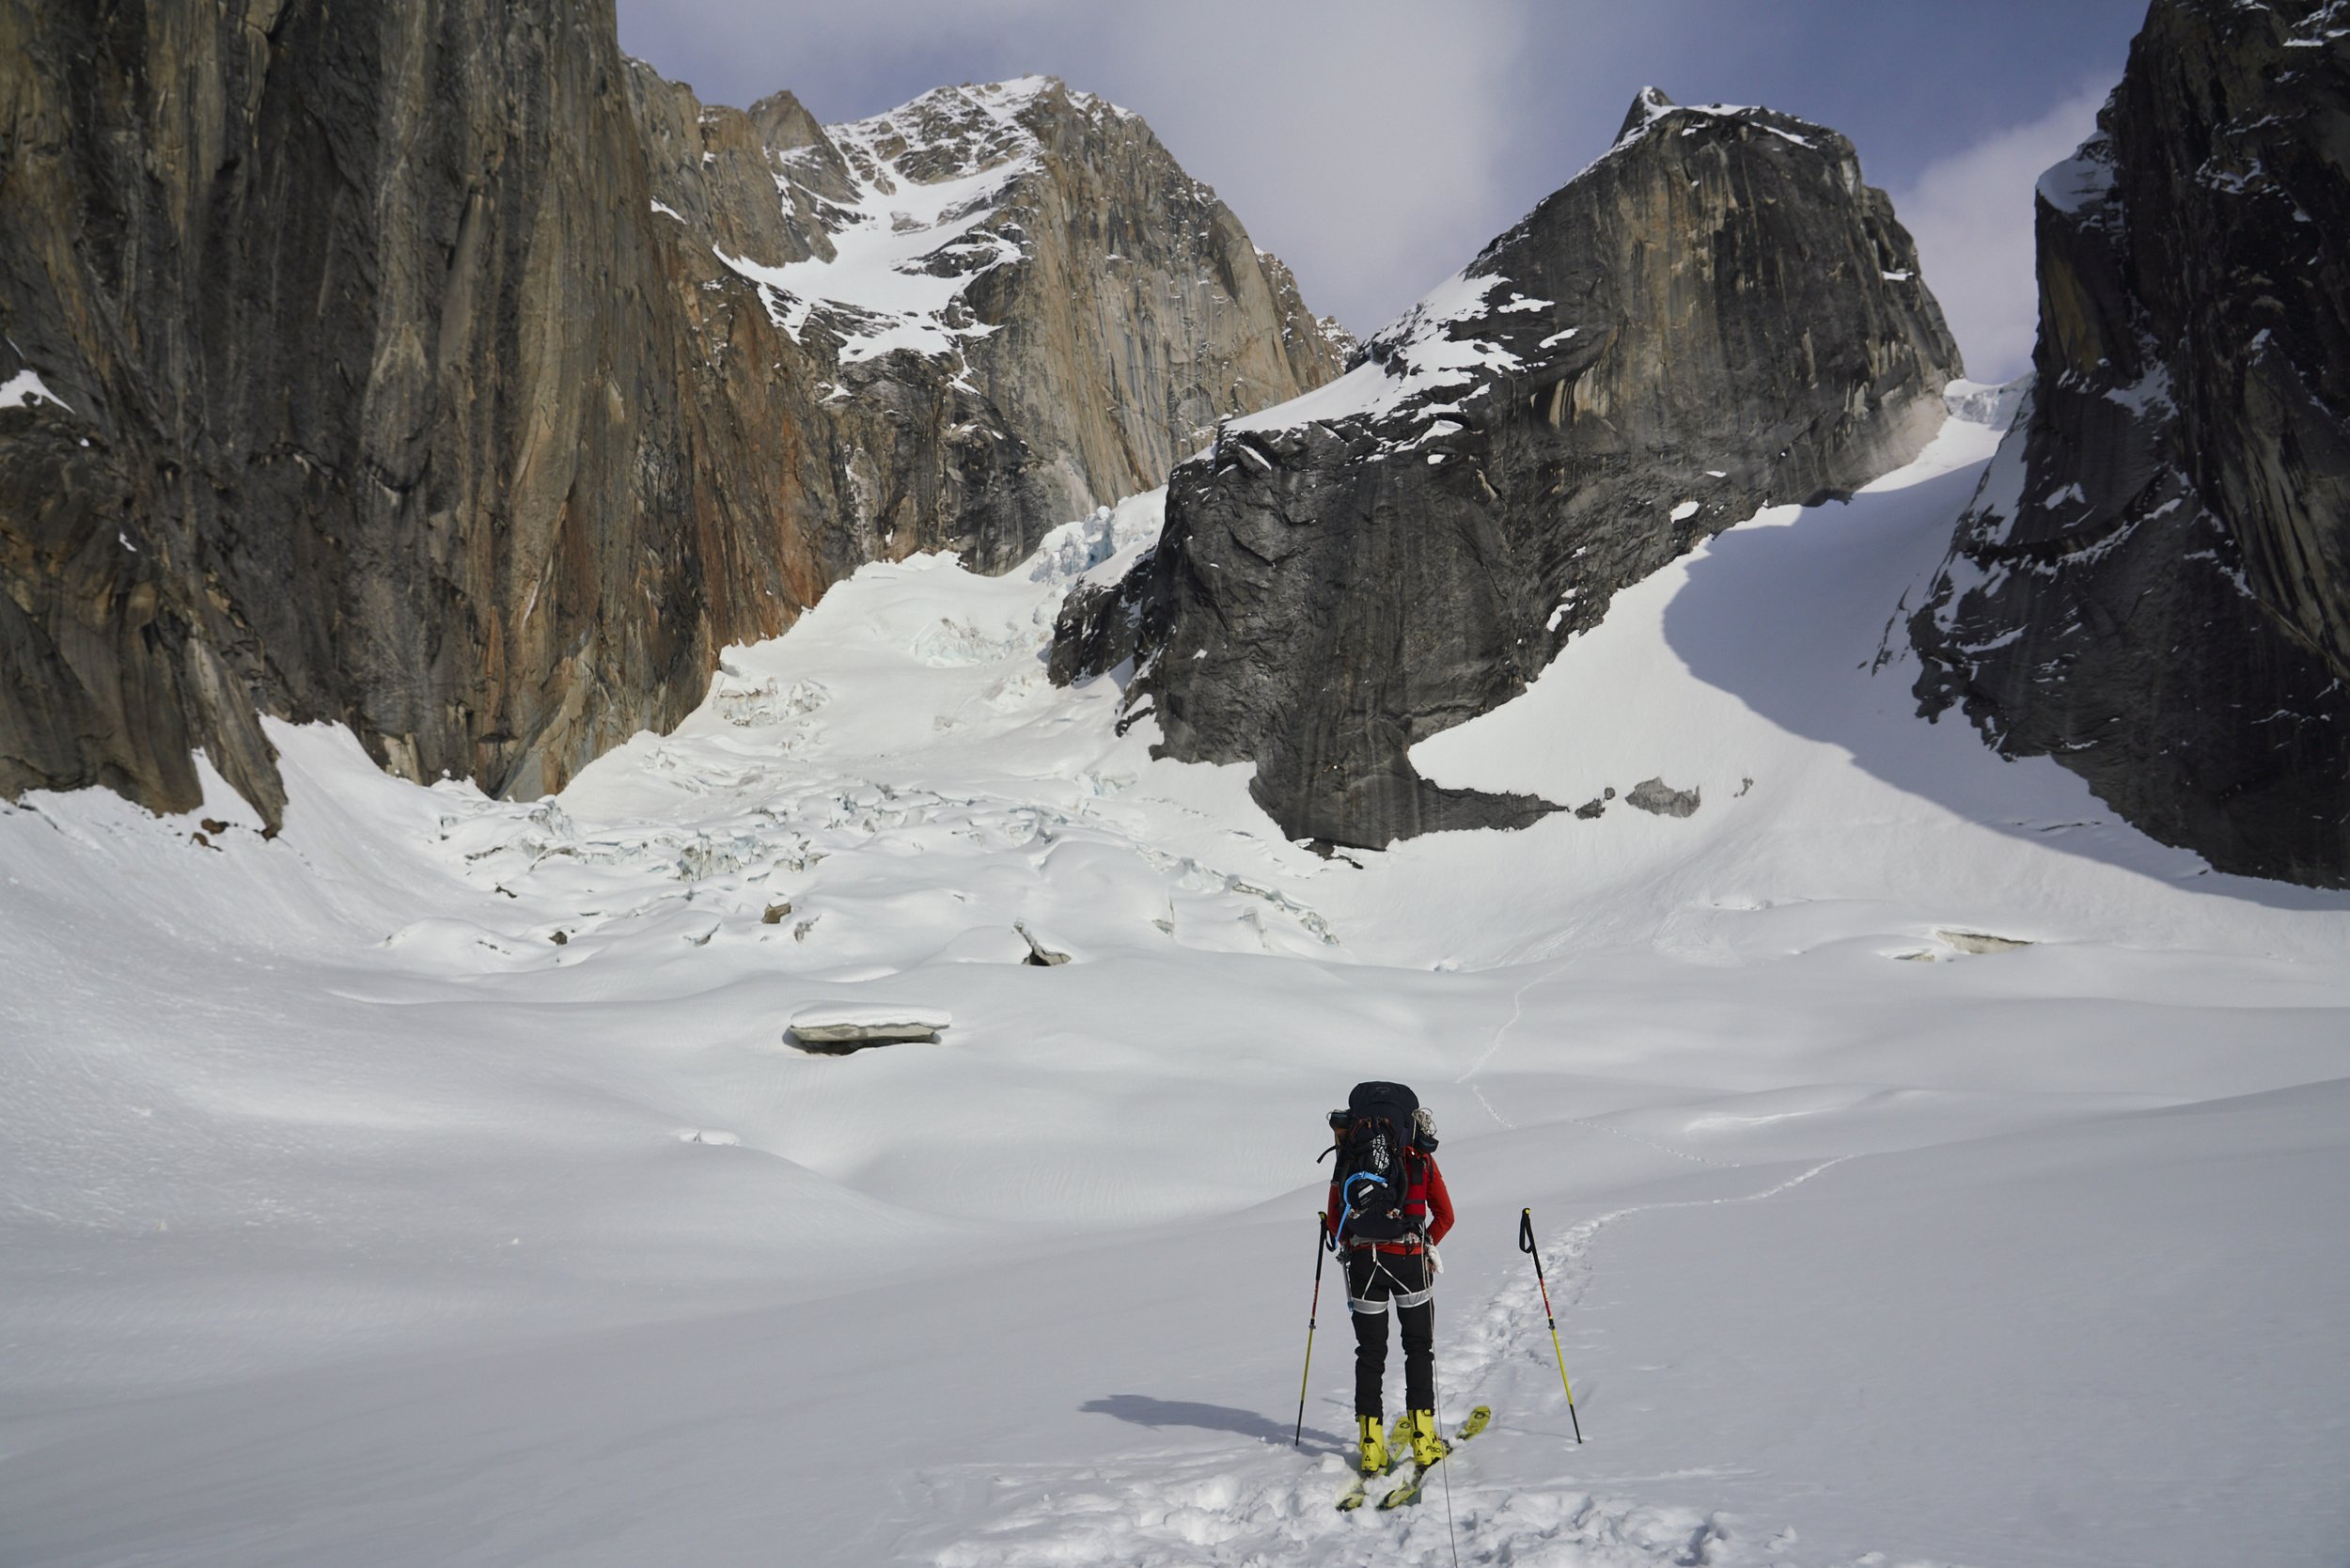 Terrain between the Ruth Gorge and approach couloir. Our previous track can be seen.